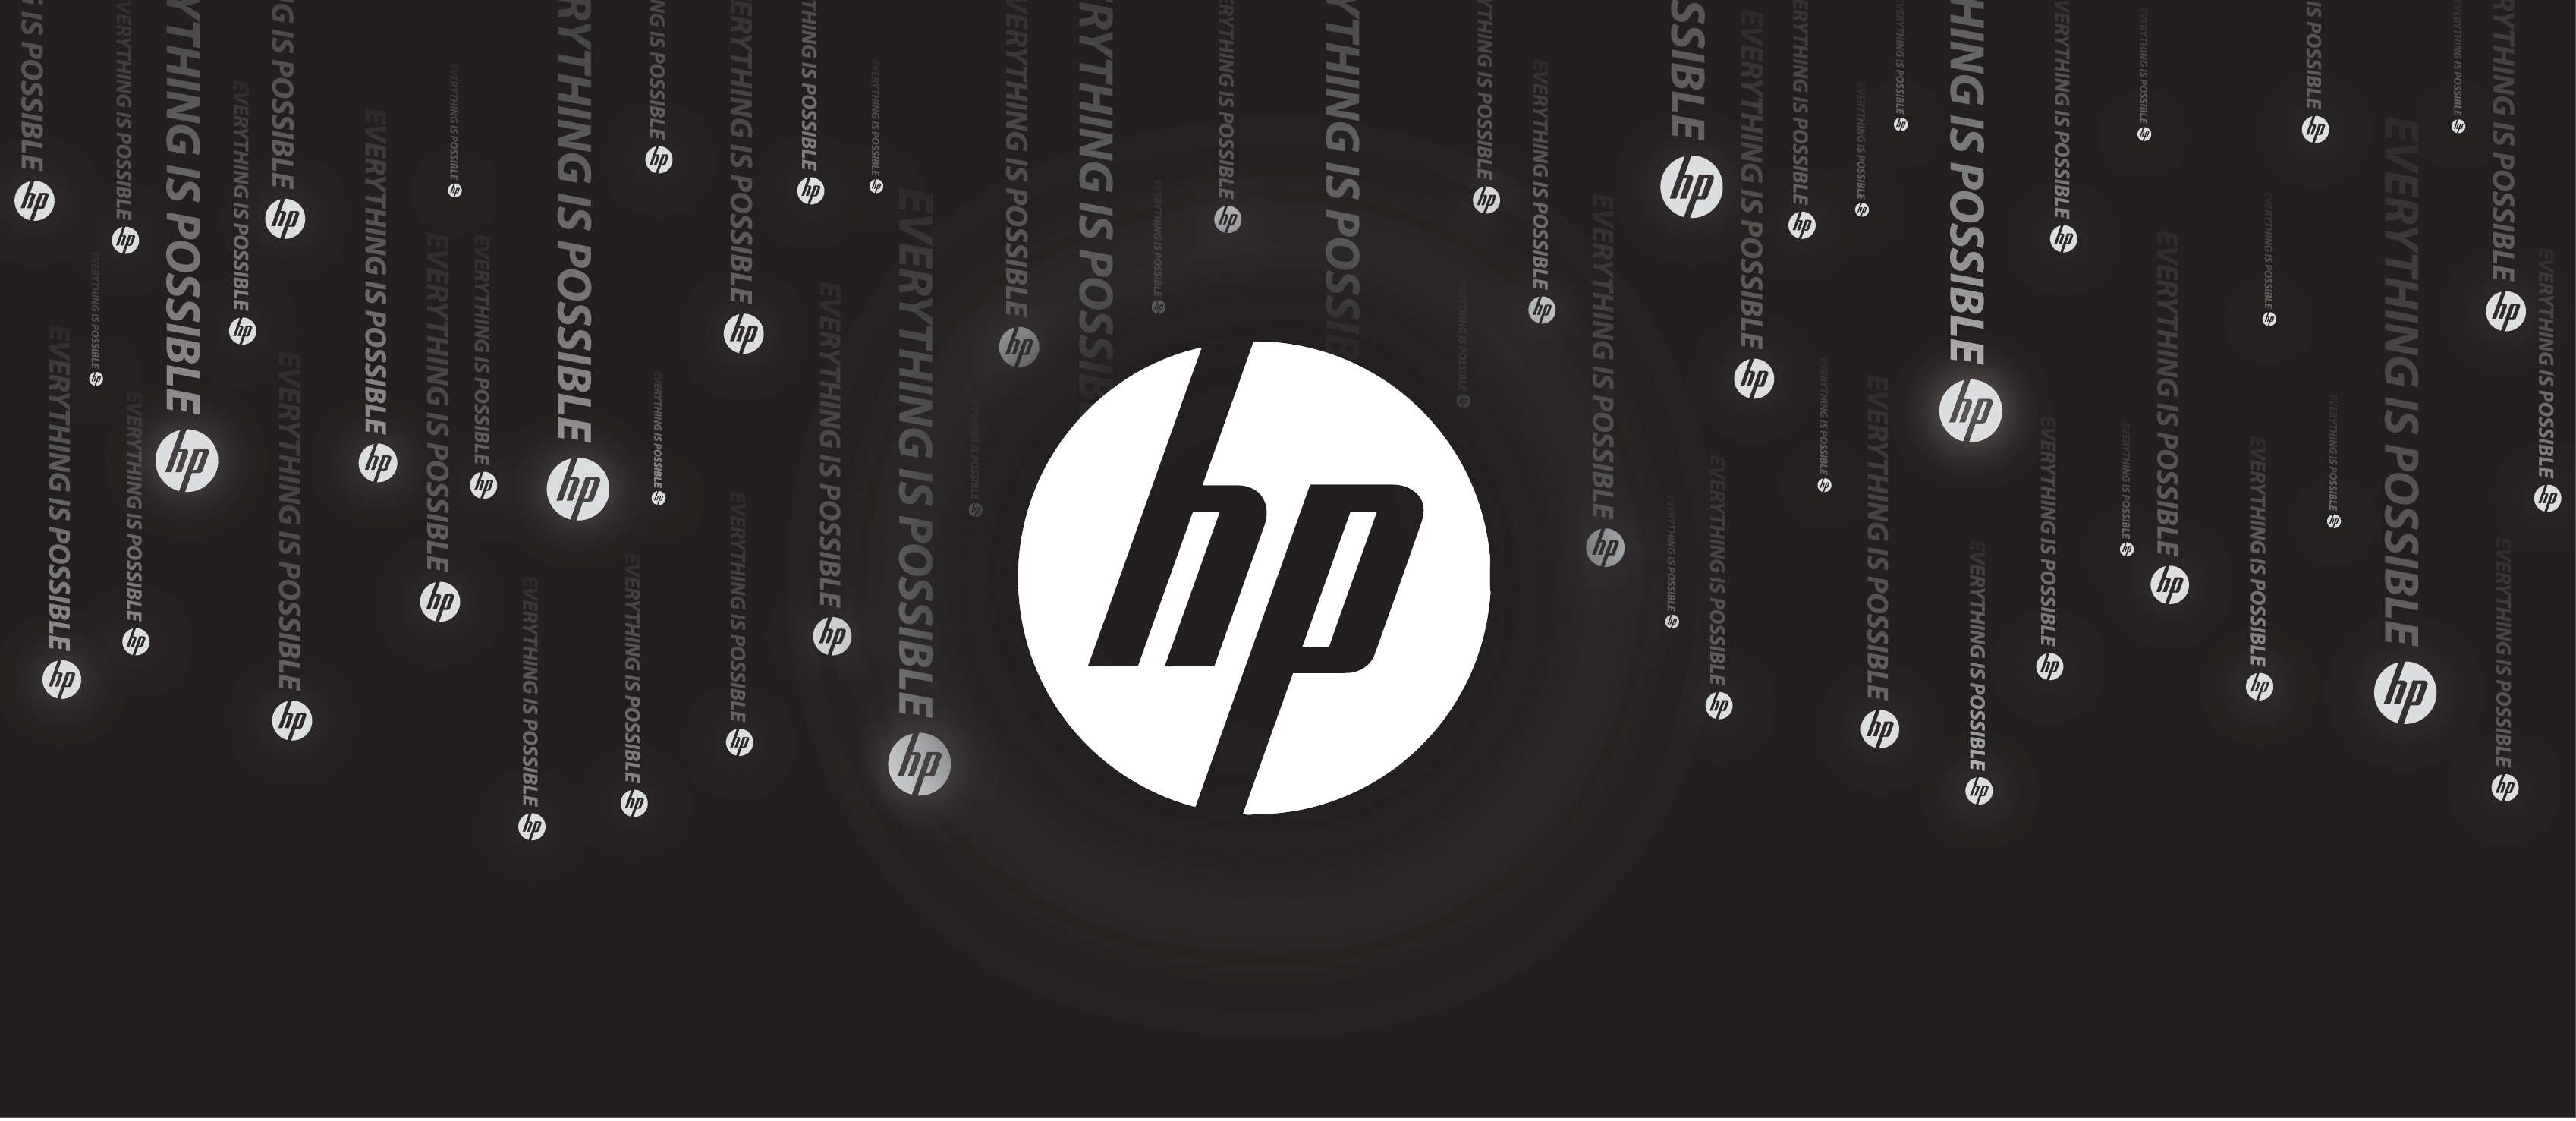 HP Black Wallpapers Top Free HP Black Backgrounds WallpaperAccess